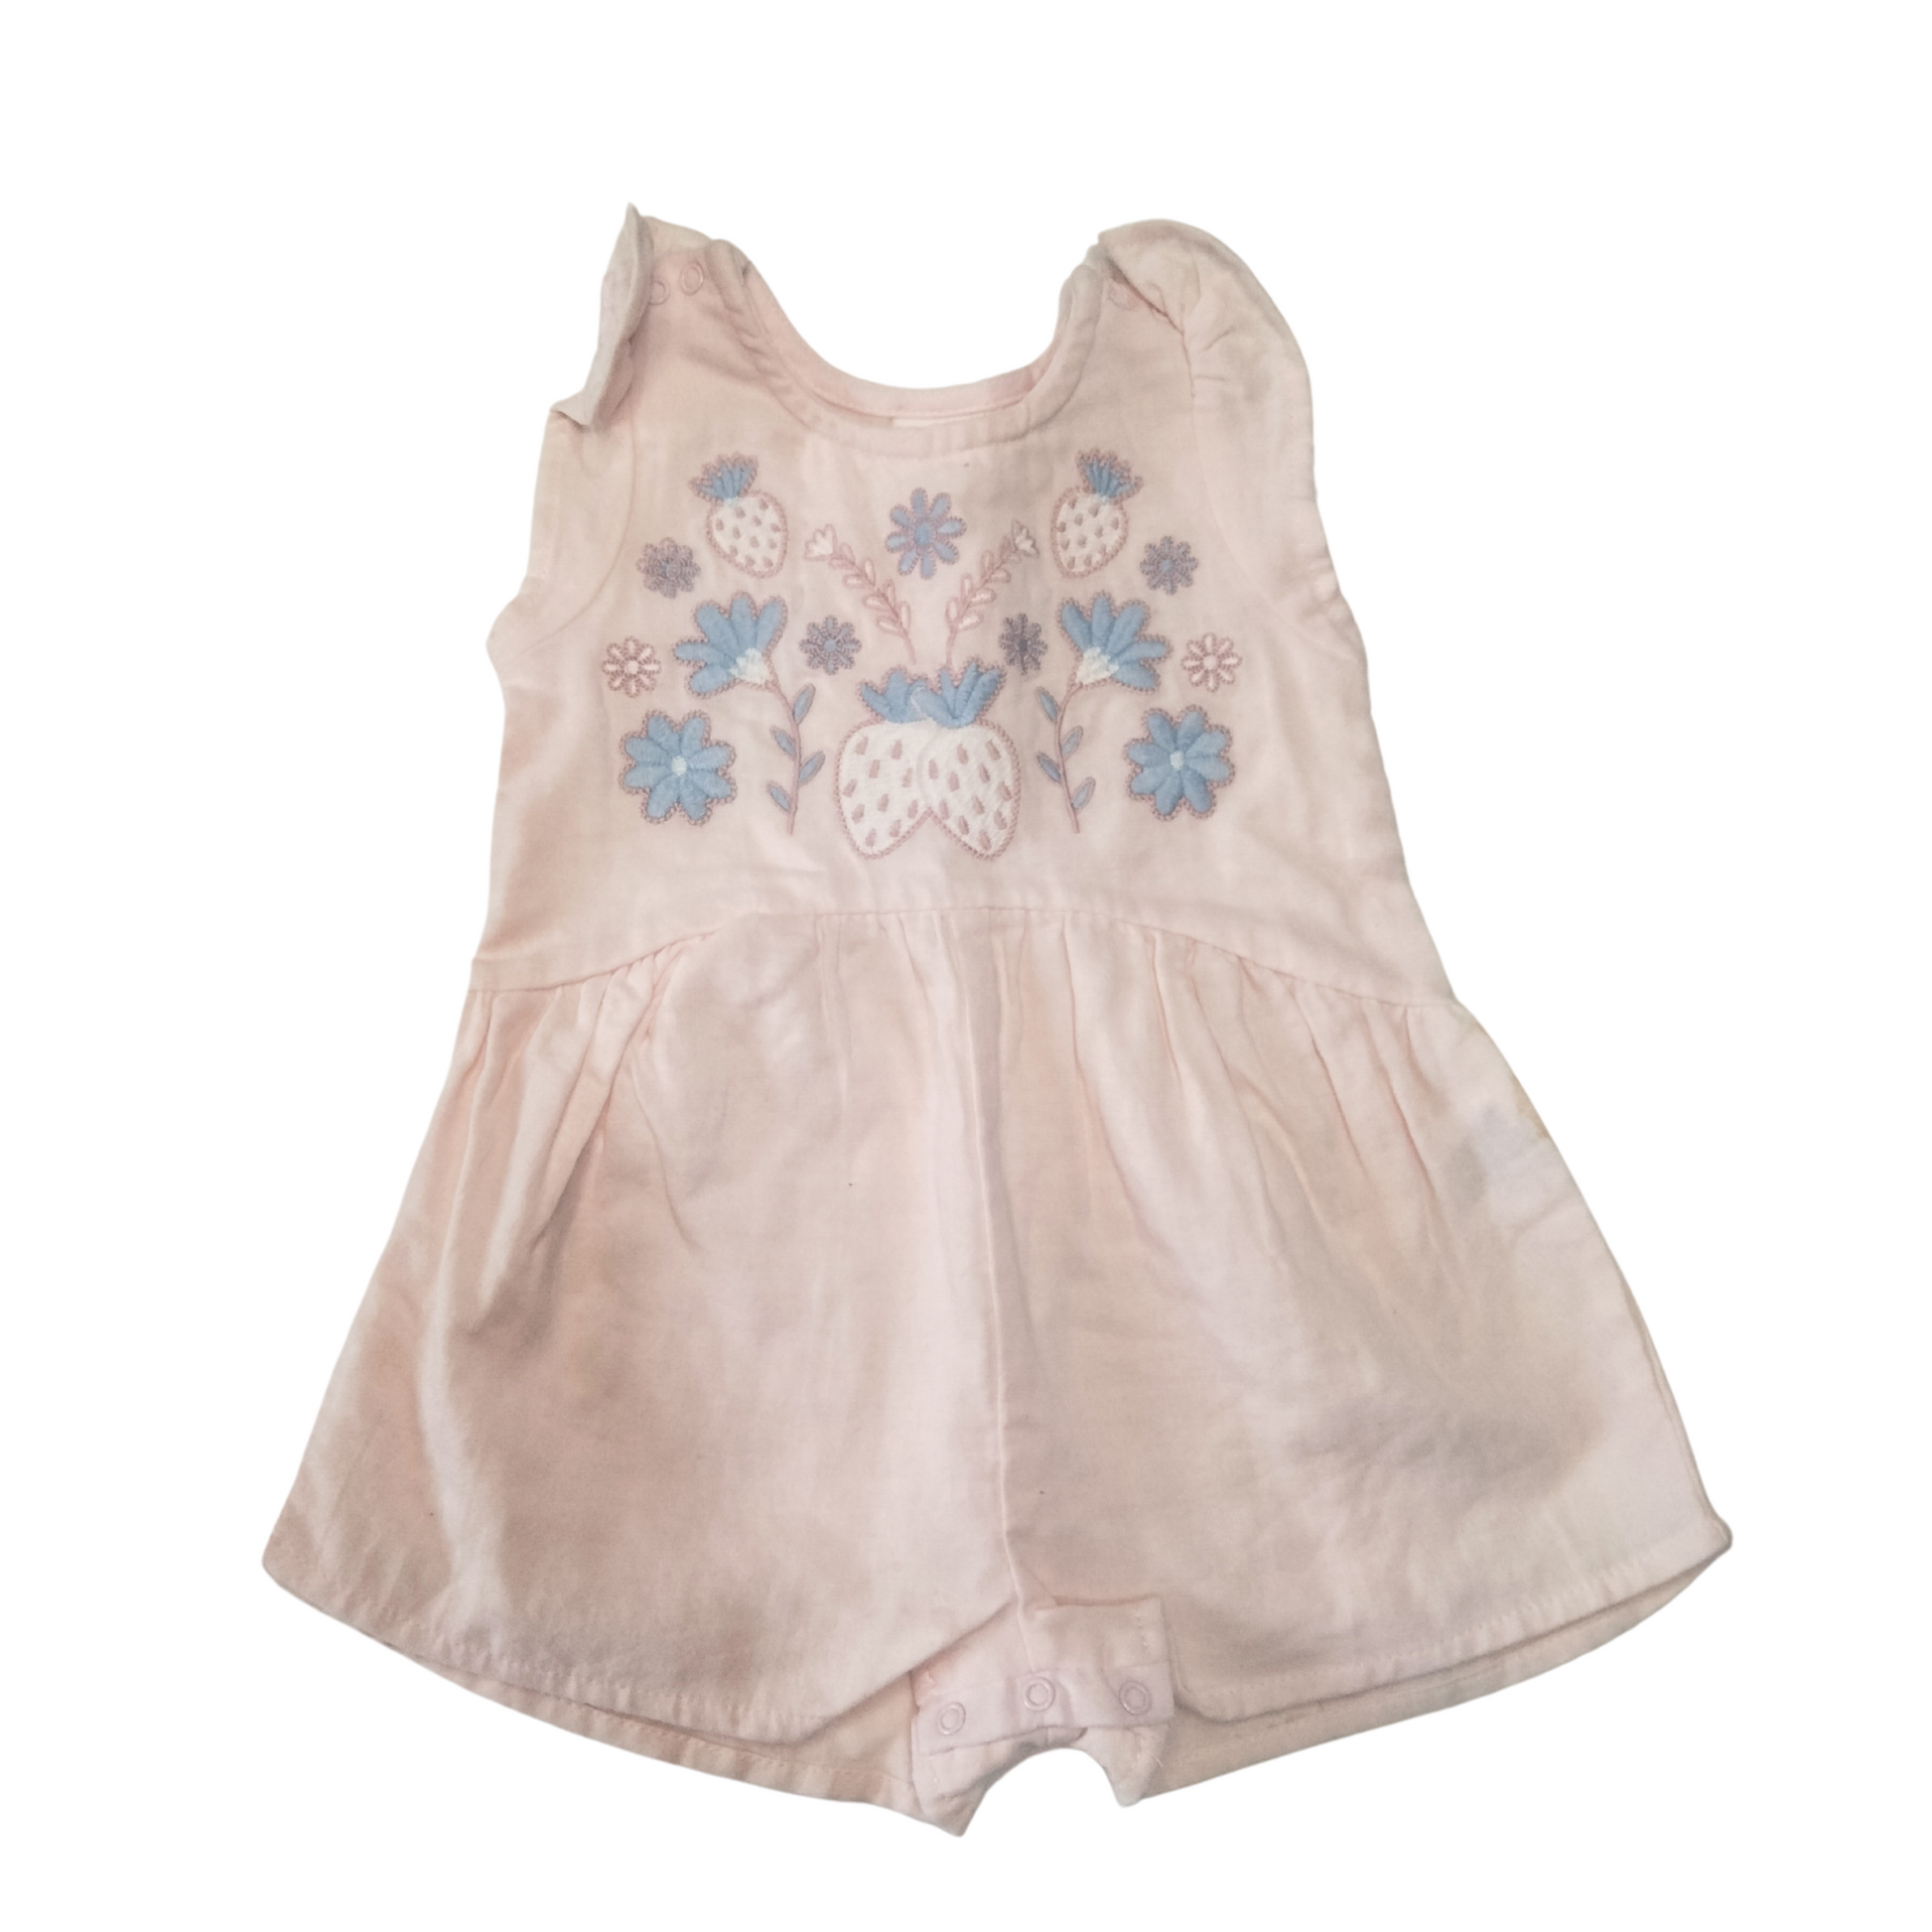 seed-baby-jumpsuit-pink-clothes-preloved-clothing-rental